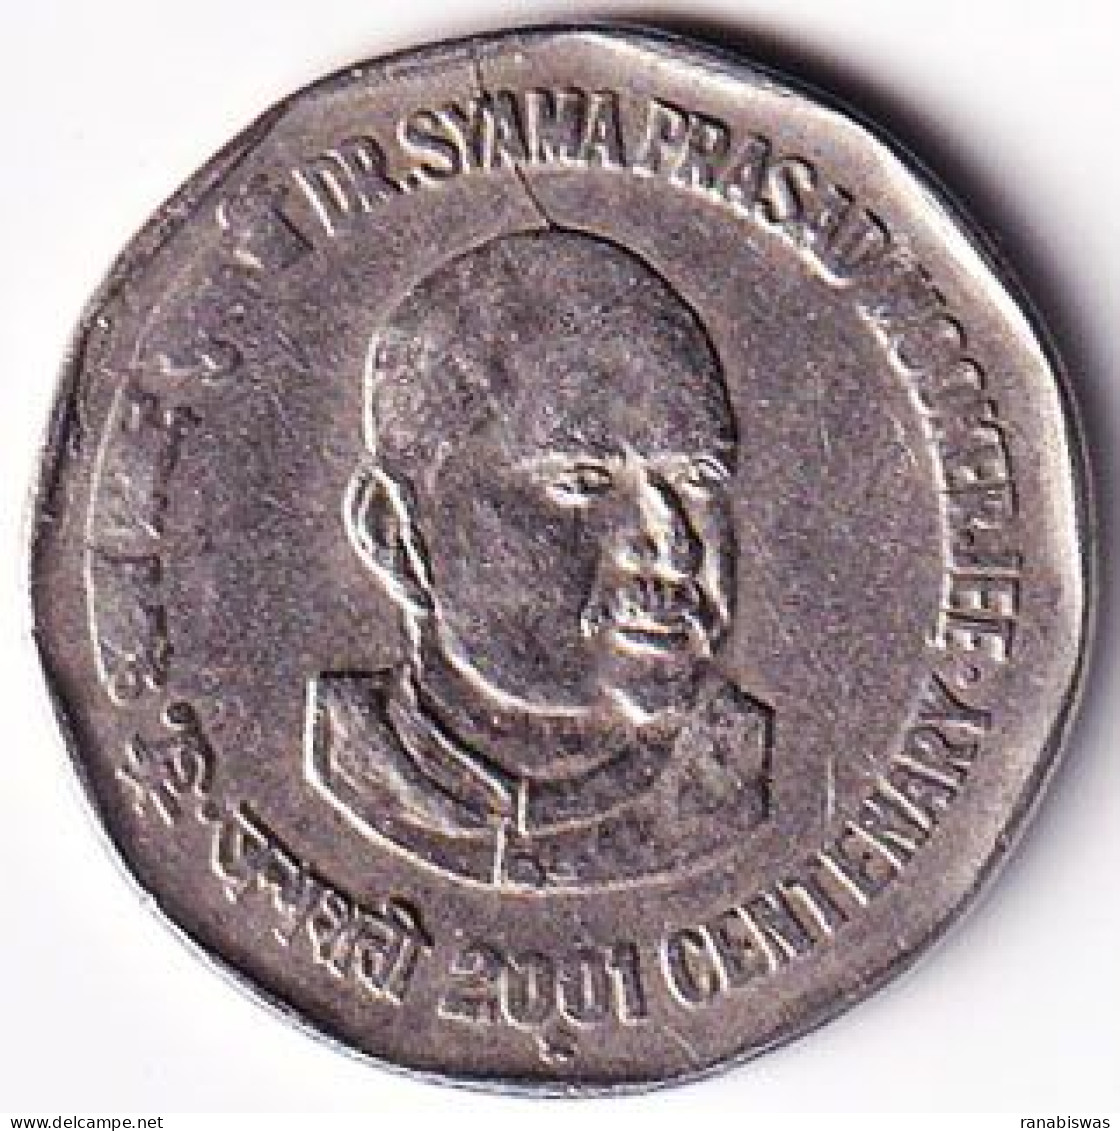 INDIA COIN LOT 19, 2 RUPEES 2001, DR. SHYAMA PRASAD MOOKERJEE, HYDERABAD MINT, XF, SCARE - Indien